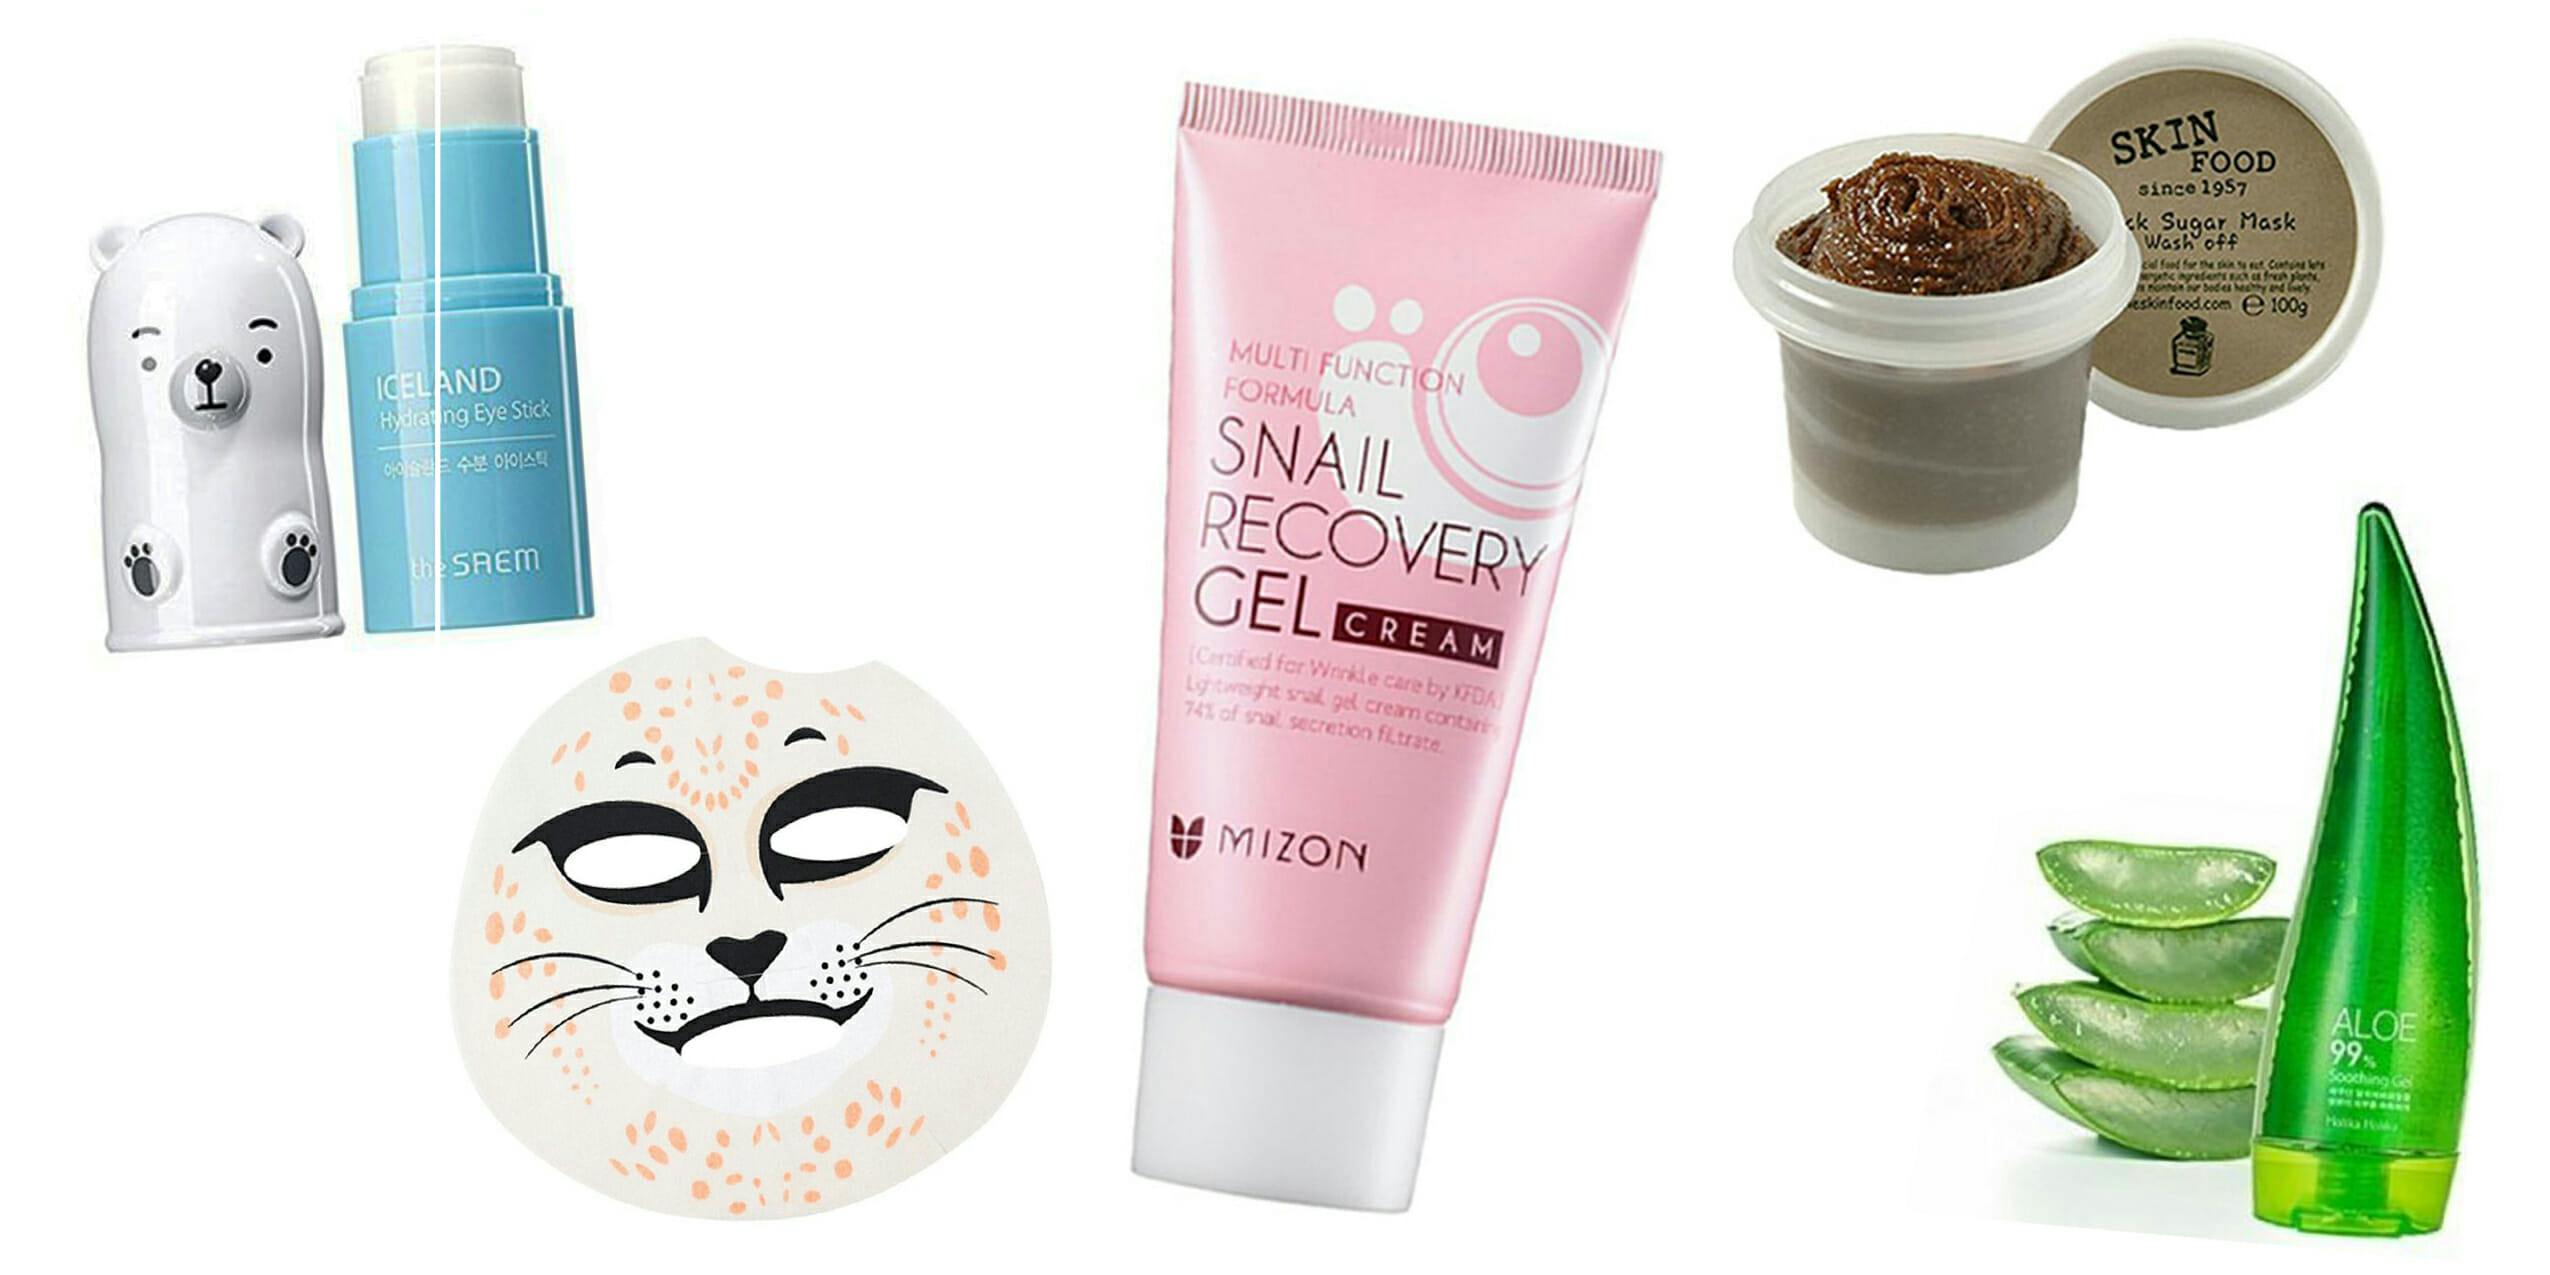 21 Best K-Beauty and Korean-Beauty Products 2023